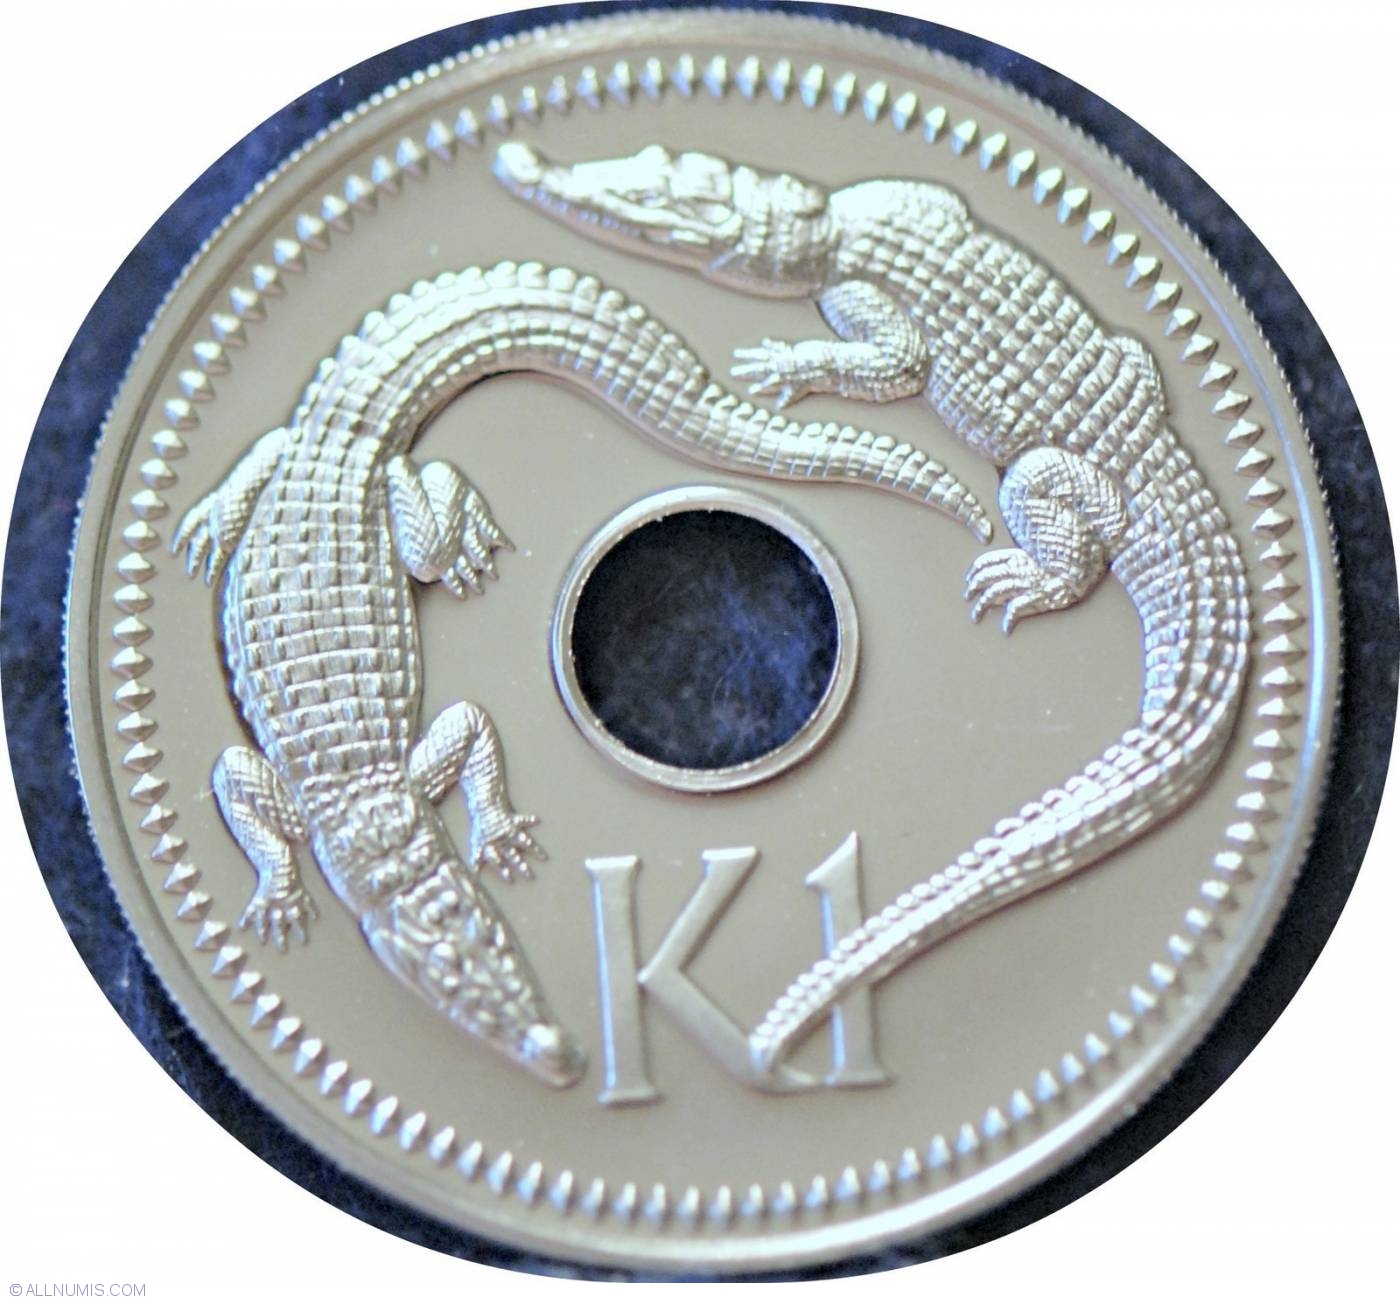 1 Kina 1975, Independent State (1975-present) - Papua New Guinea - Coin